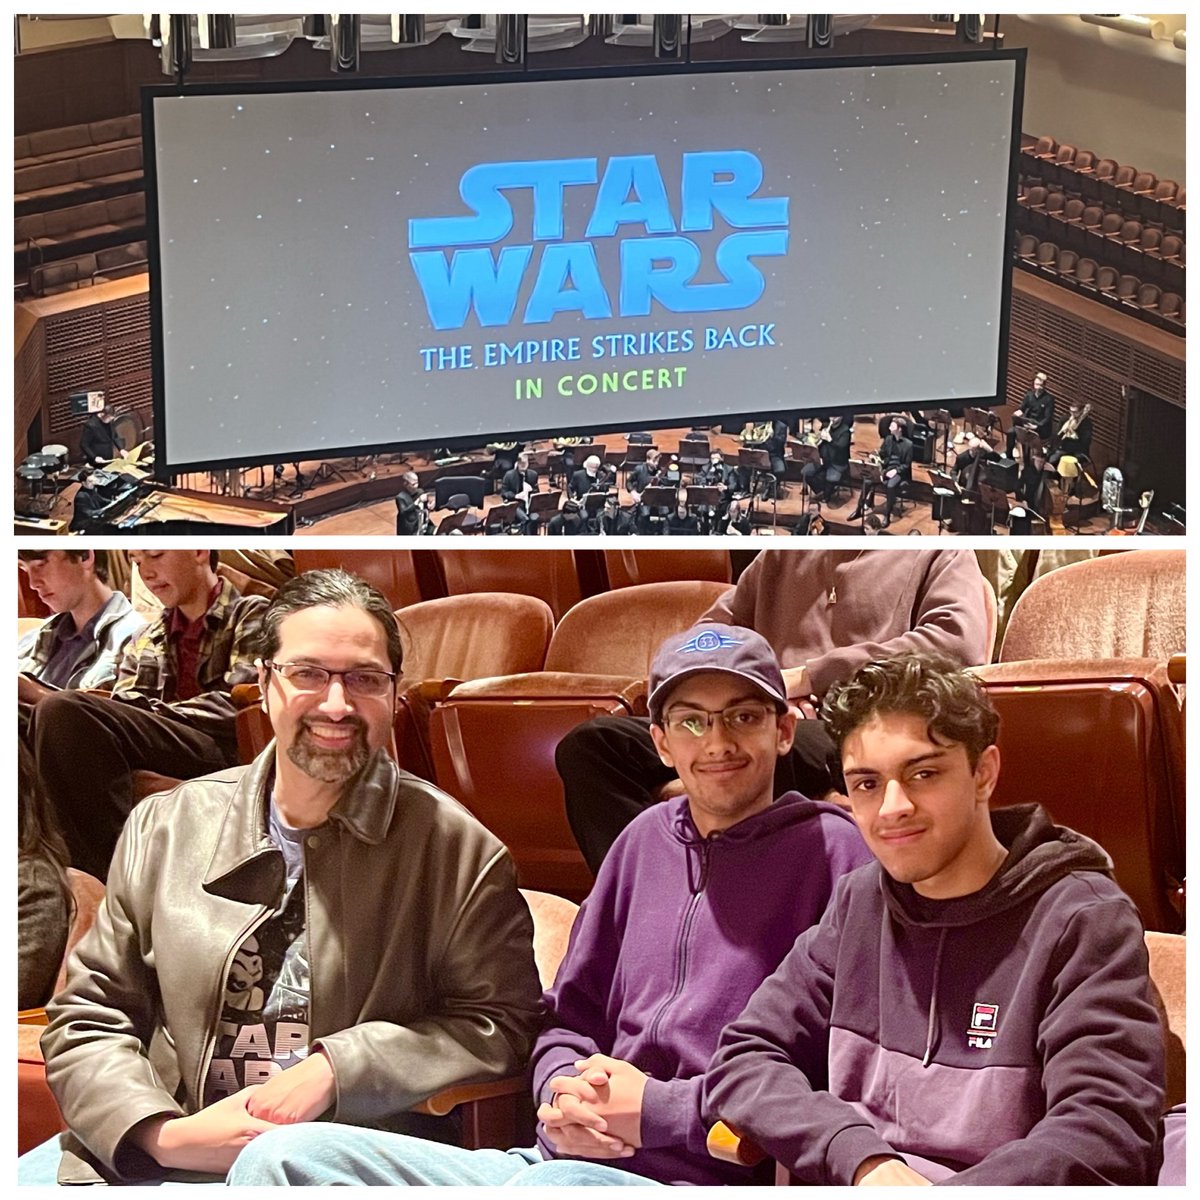 A night of music and movies! @SFSymphony #Maythe4thBeWithYou